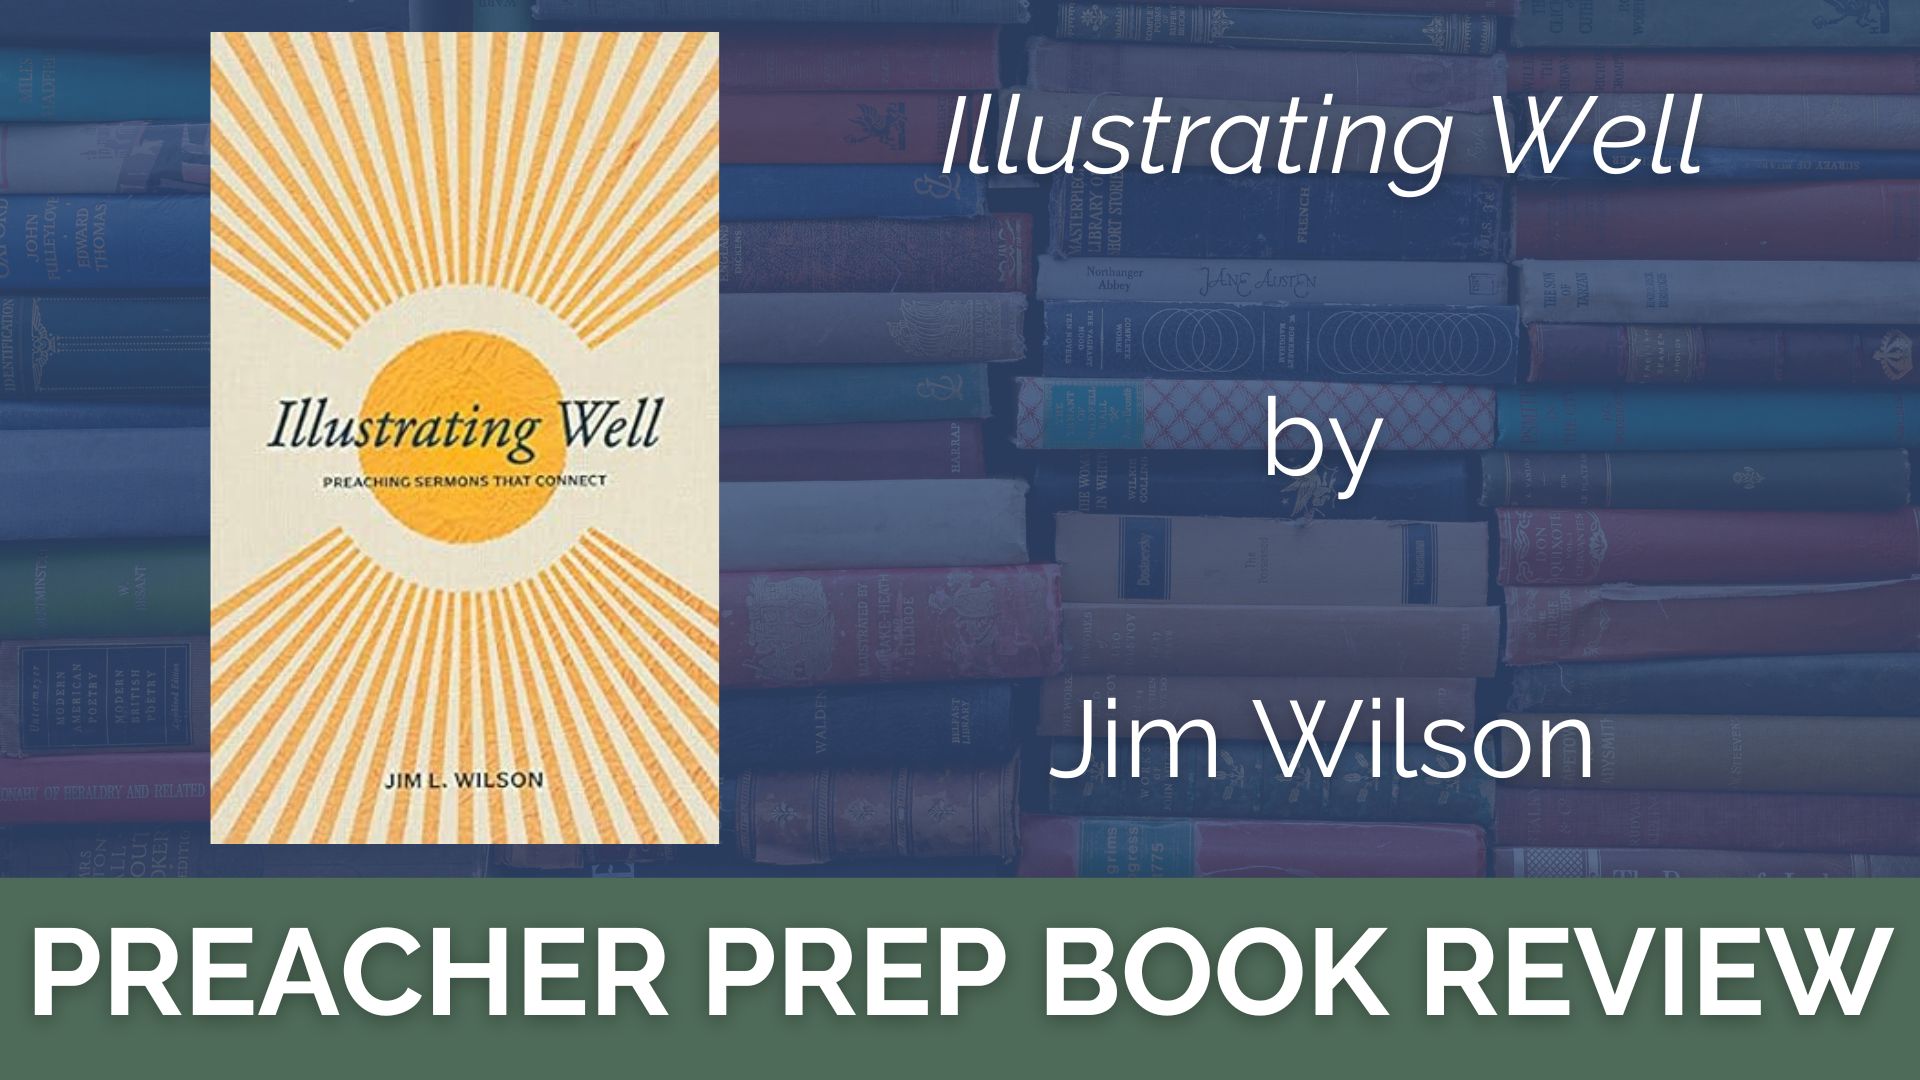 Book Review: Illustrating Well by Jim Wilson